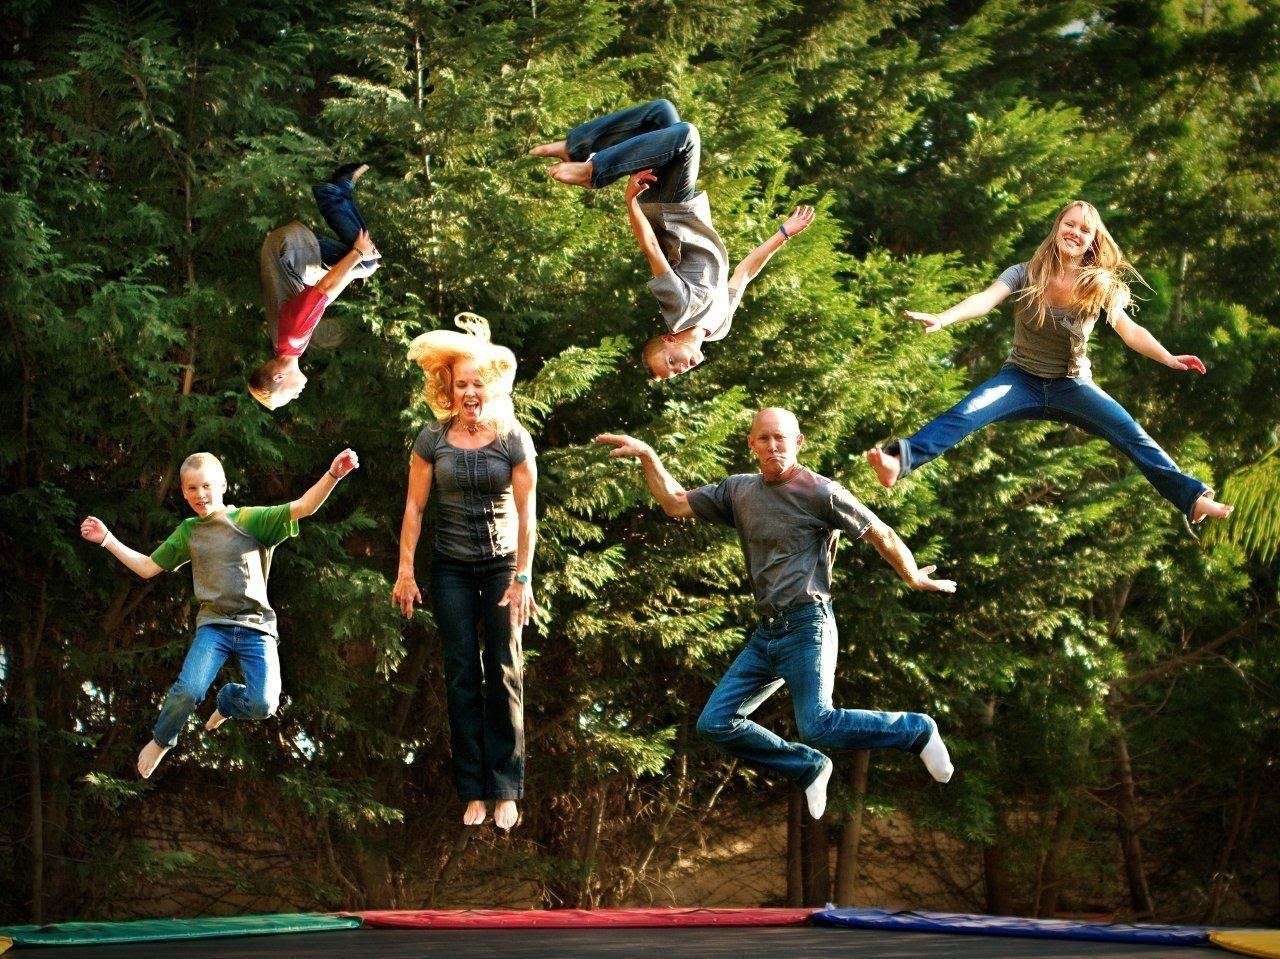 The Main Benefits of the Best Trampolines for your Family